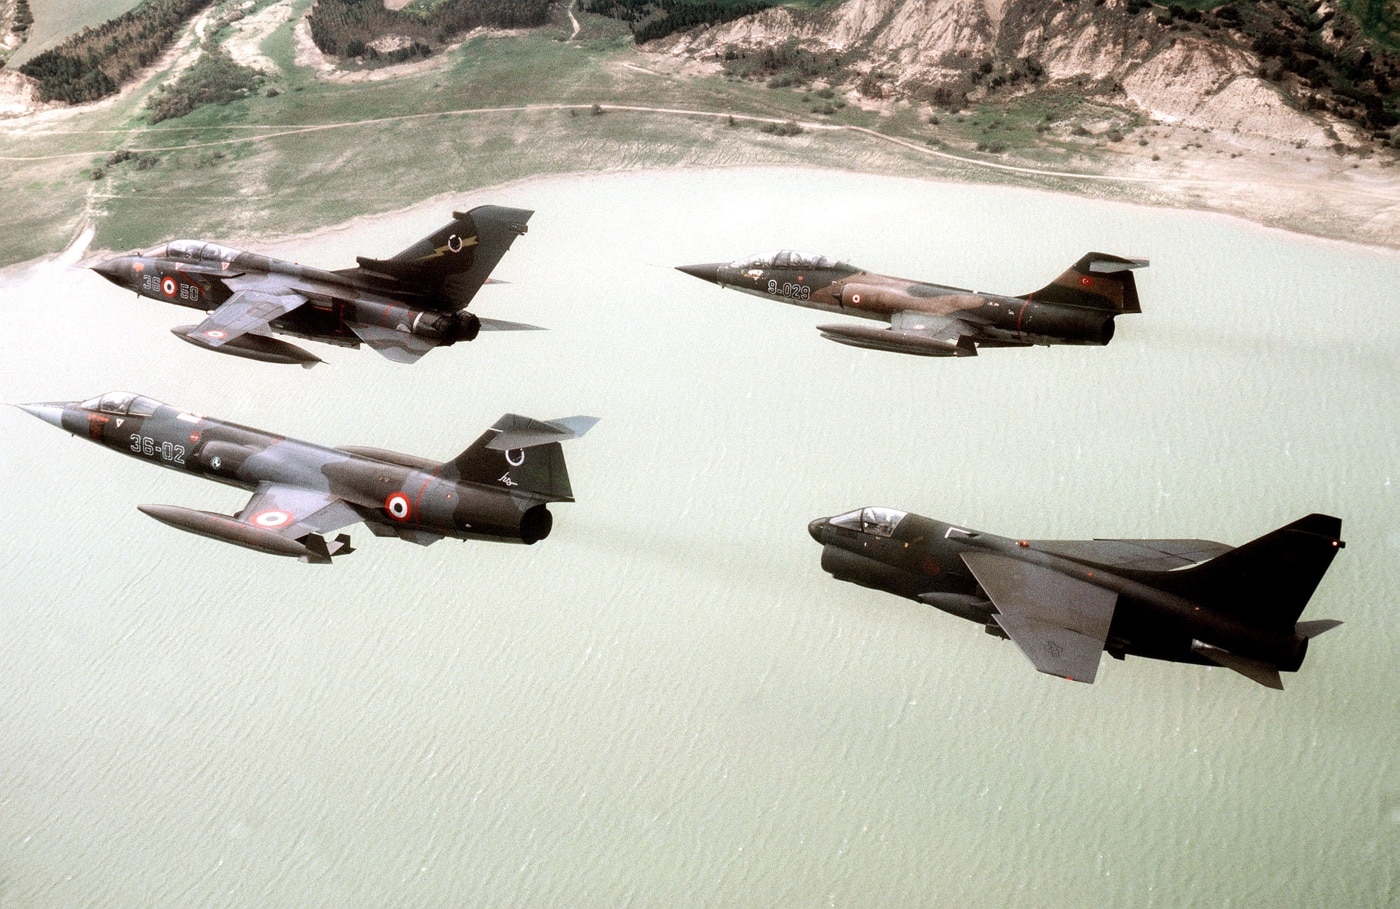 Shown here are an Italian F-104 Starfighter, an Italian Tornado, a Turkish F-104 Starfighter and a U.S. A-7D Corsair II in formation during NATO exercise Dragon Hammer '87.